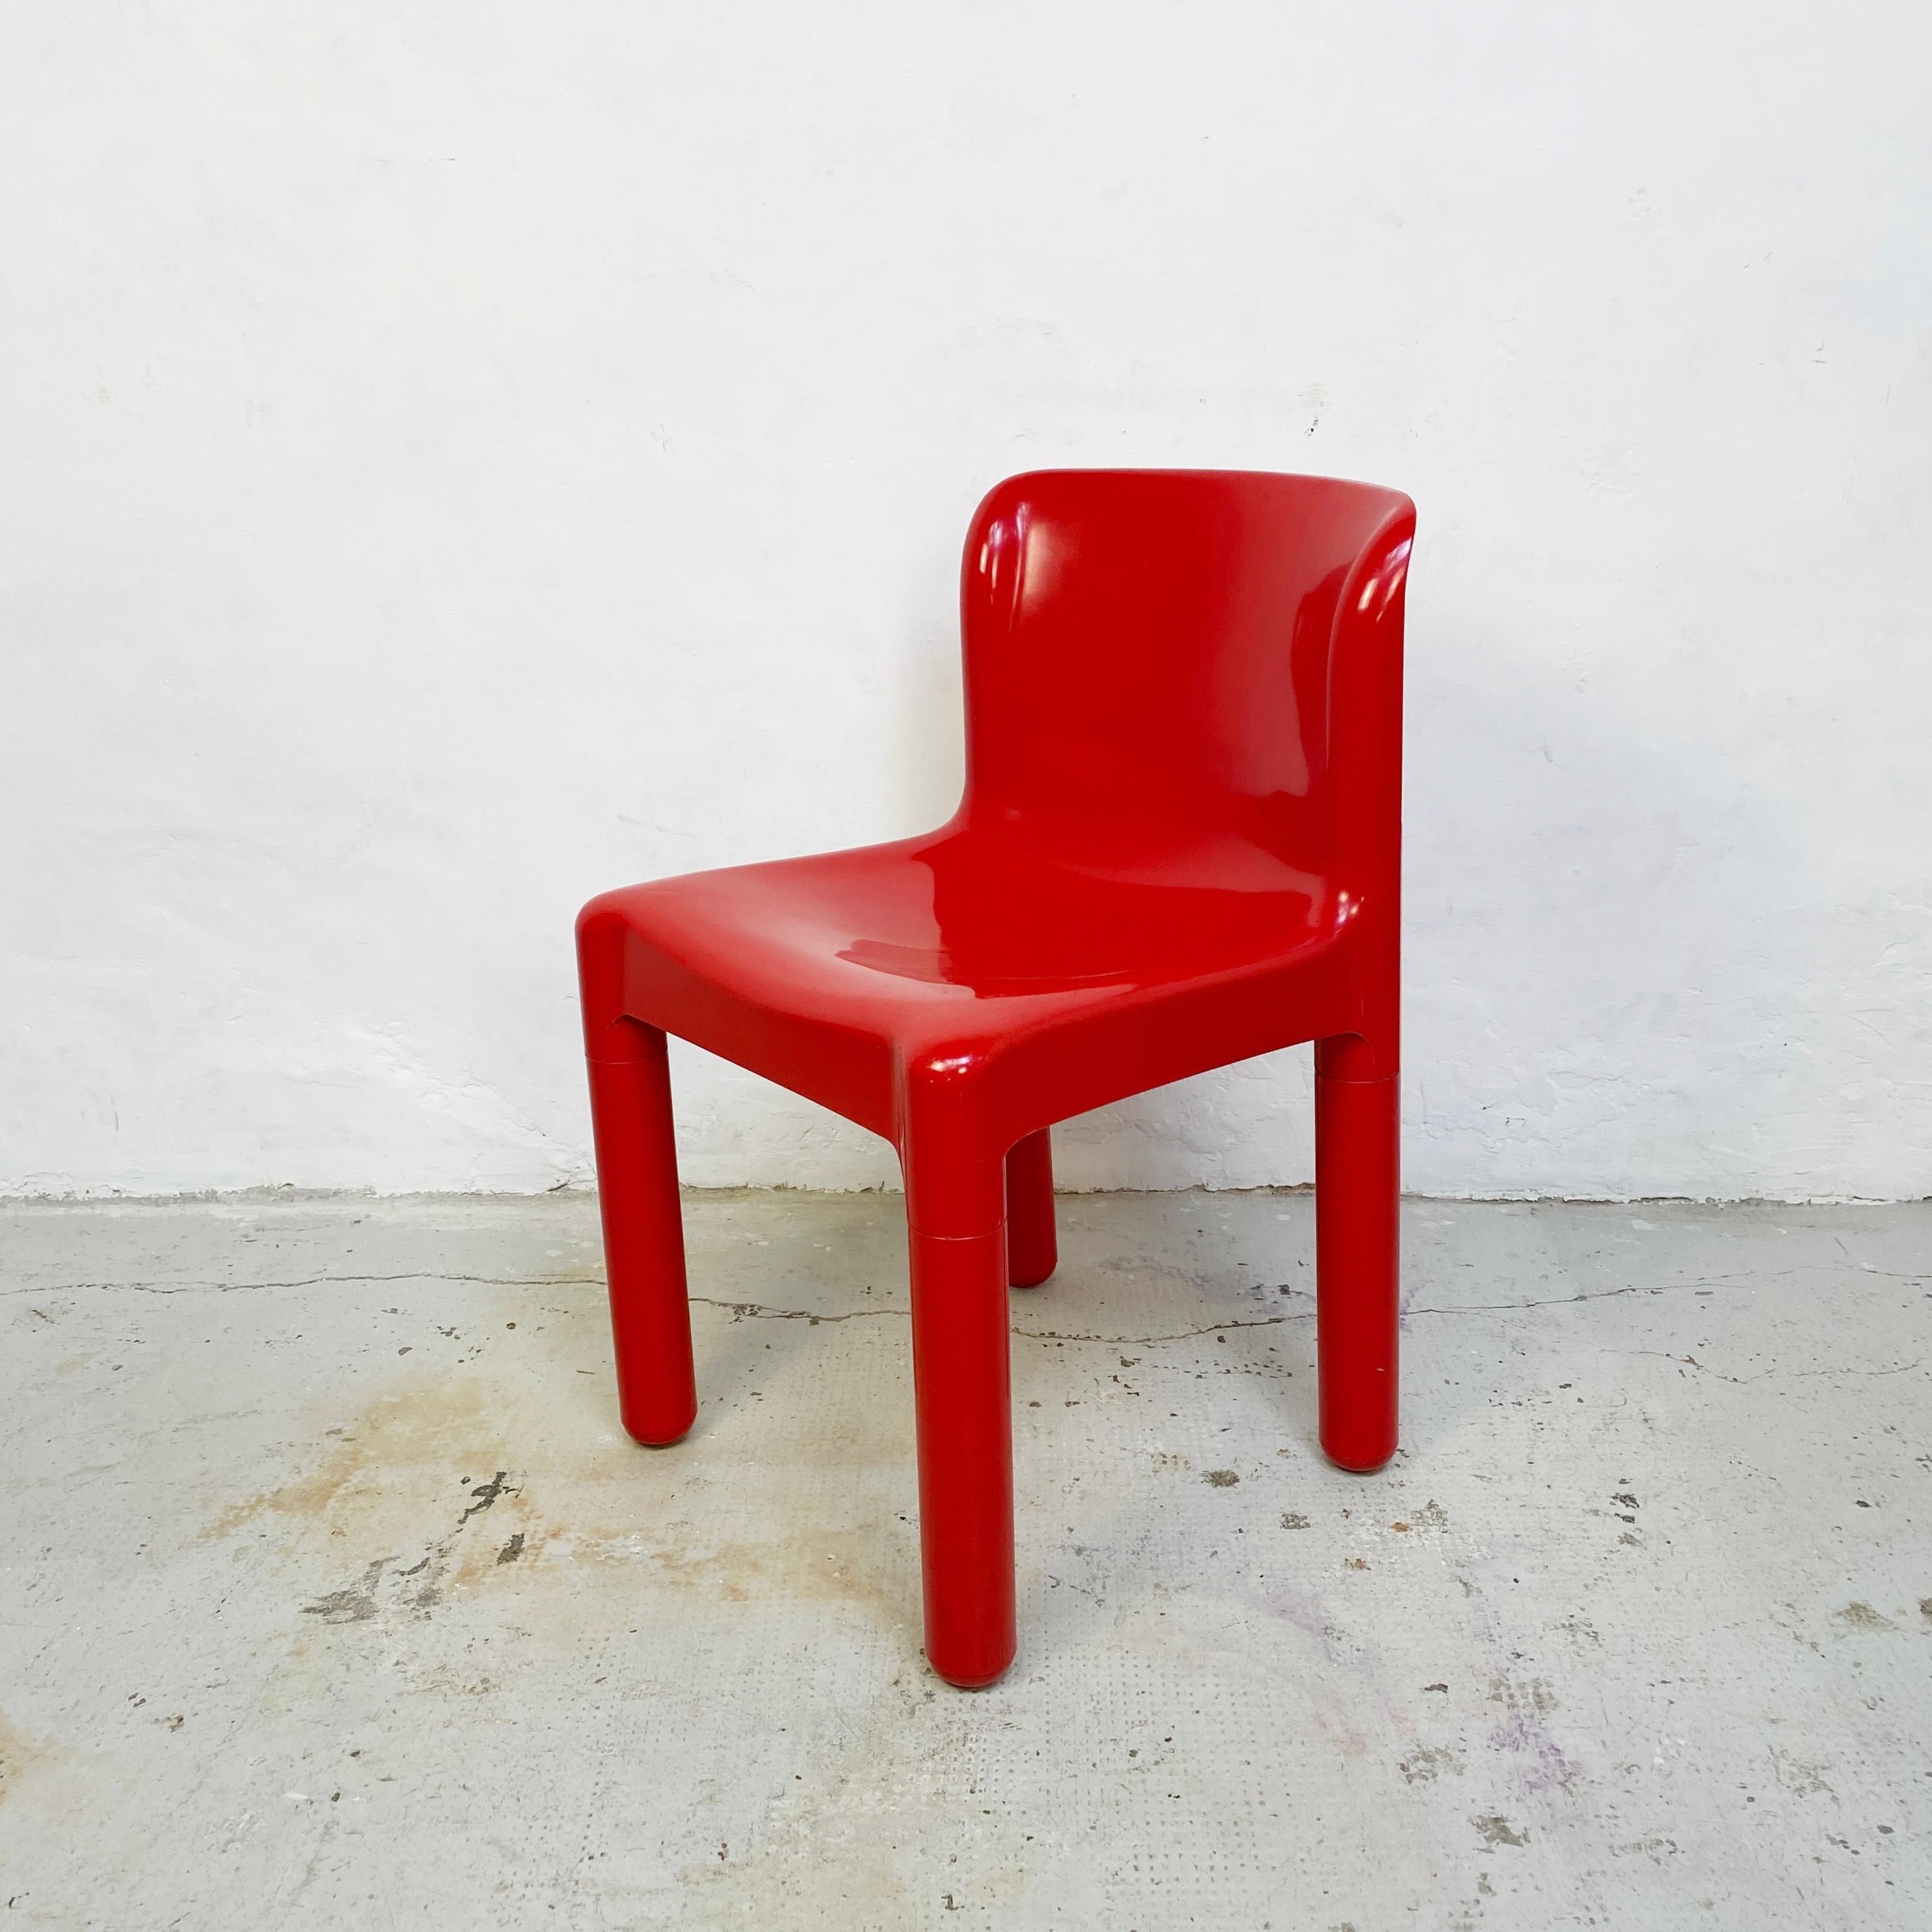 i have some red chairs in italian